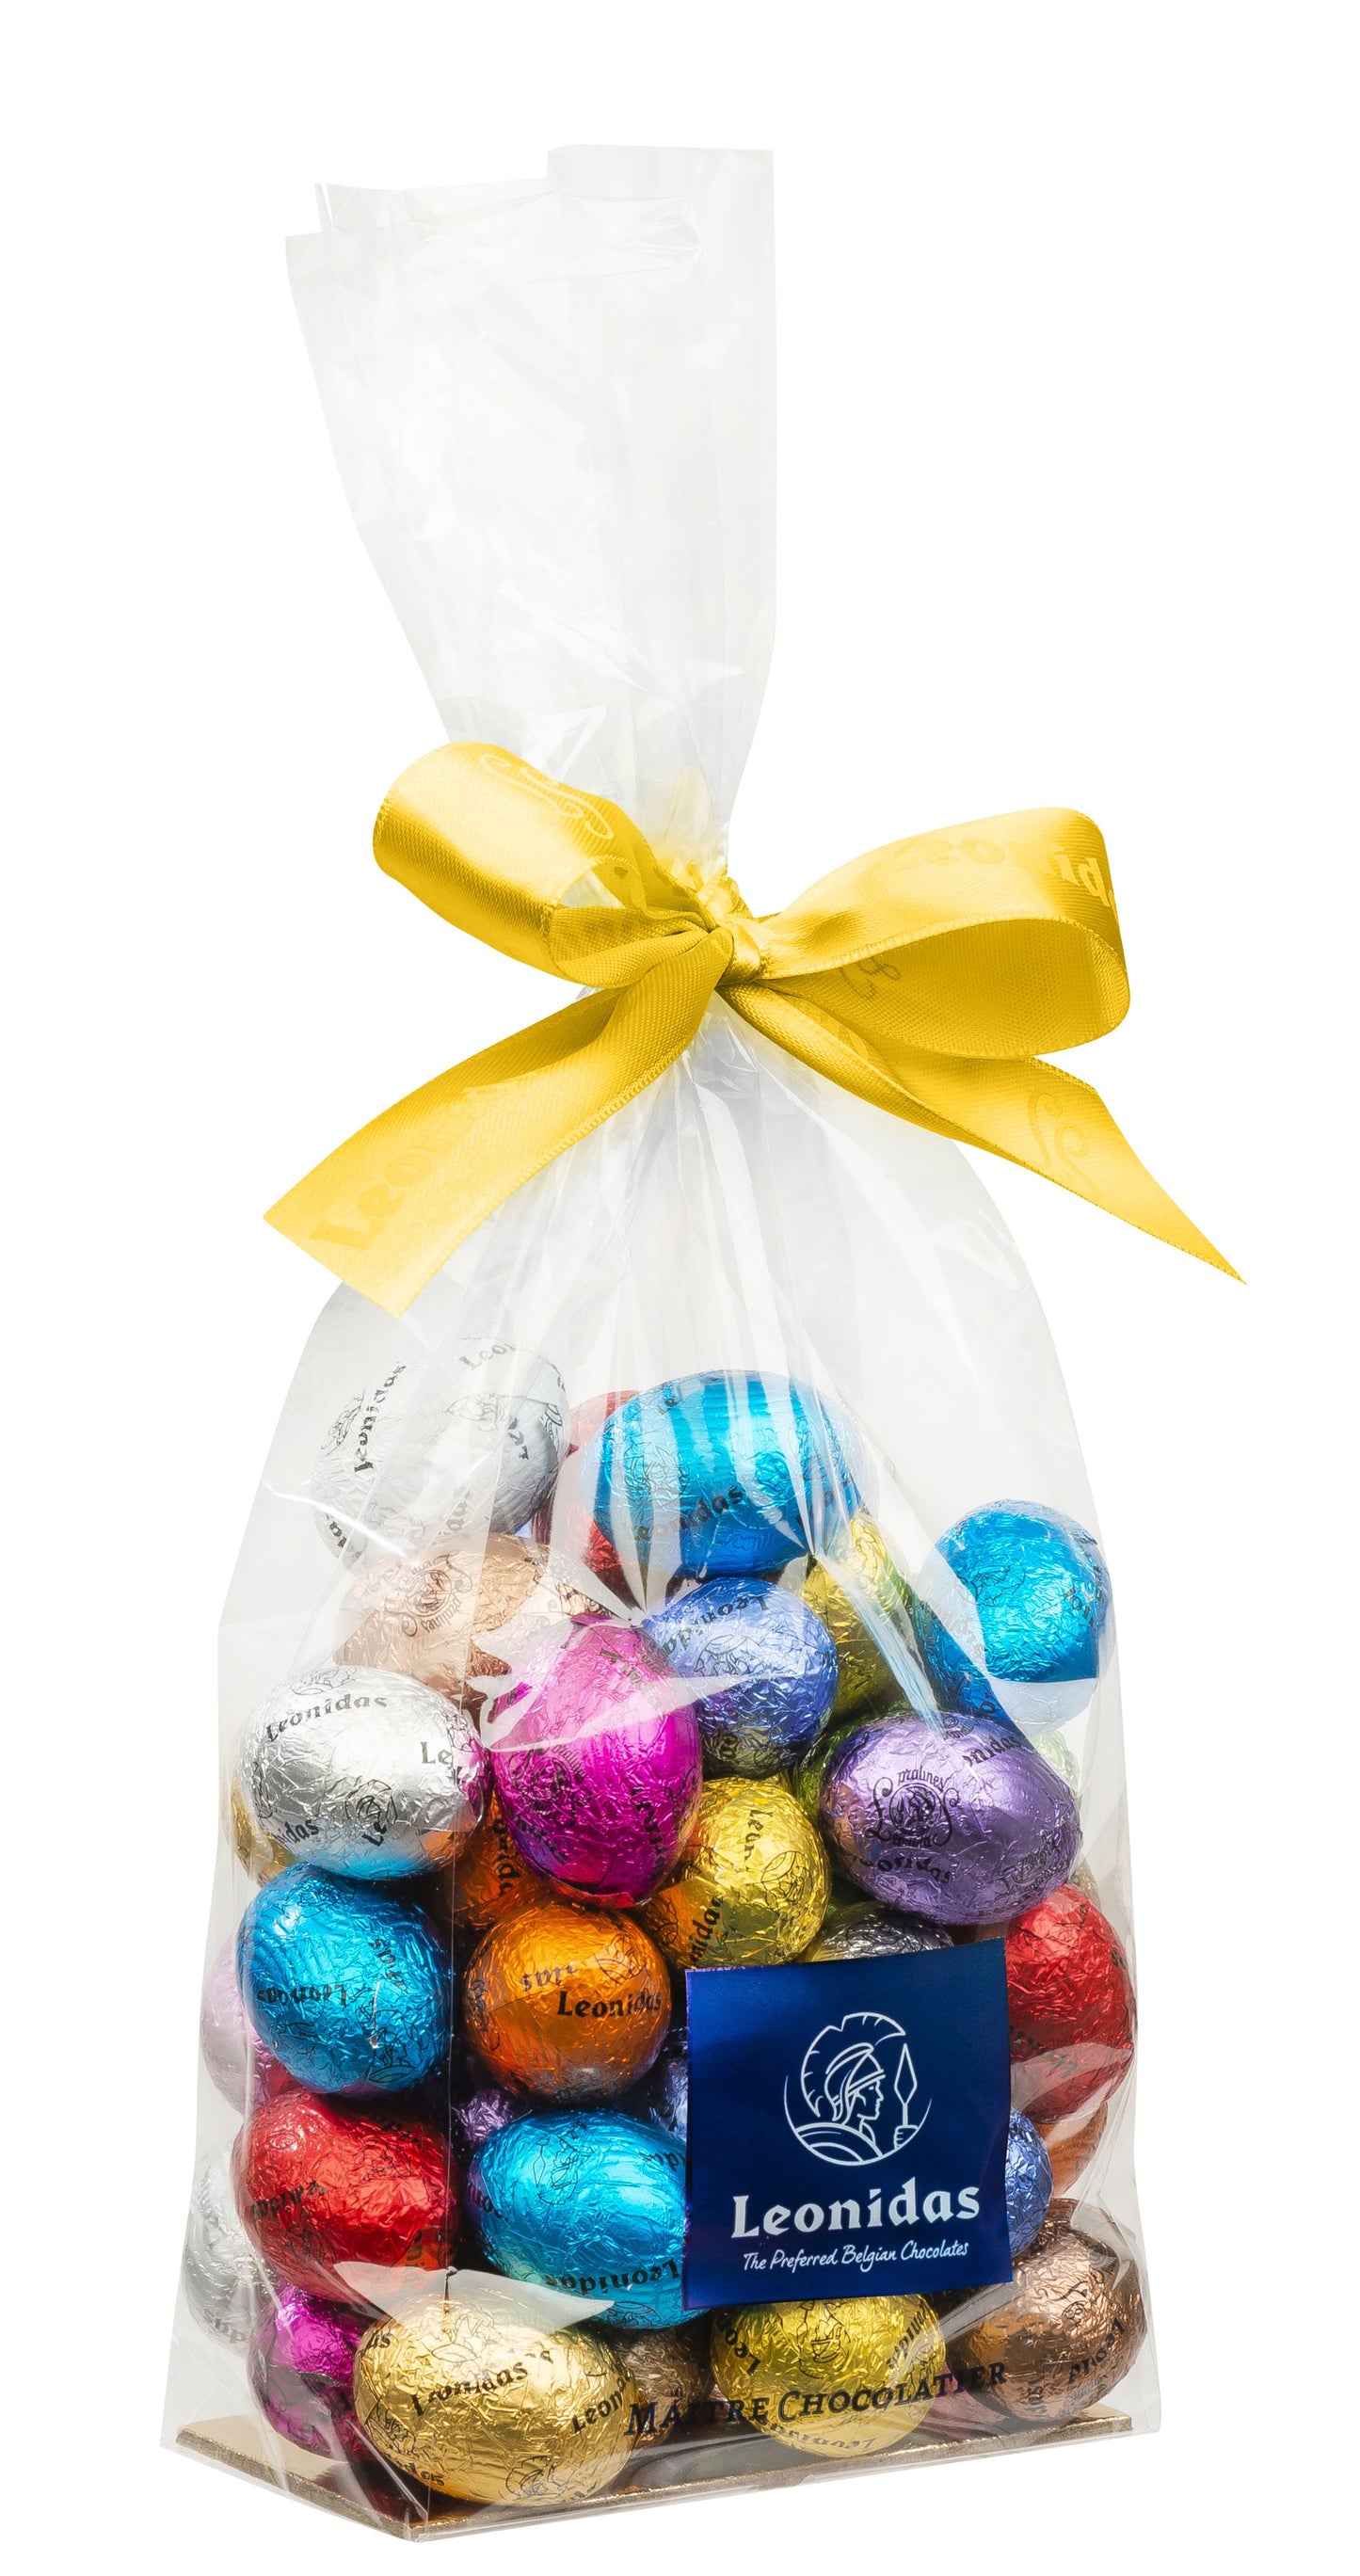 Choose your own Easter Mini Eggs - www.chocolateorders.com